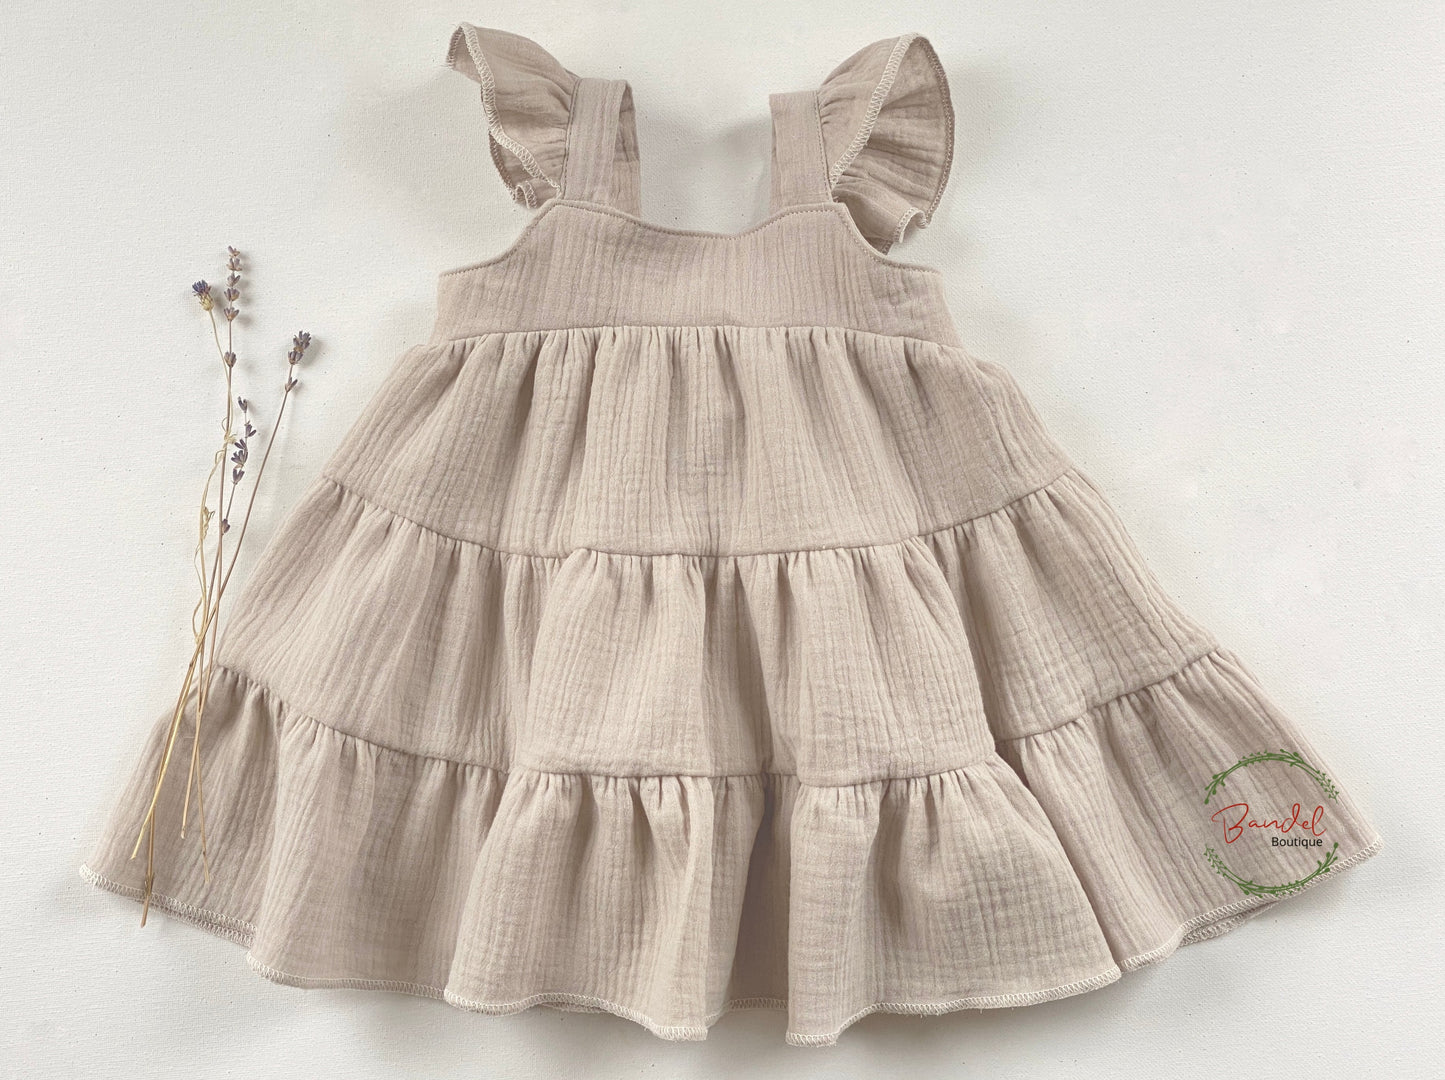 Sand-brown double gauze girl dress is crafted from sustainable fabric. Featuring gathering on the skirt, flutter sleeves, and elastic on the back bodice, this dress offers a comfortable fit and a stylish, timeless look.